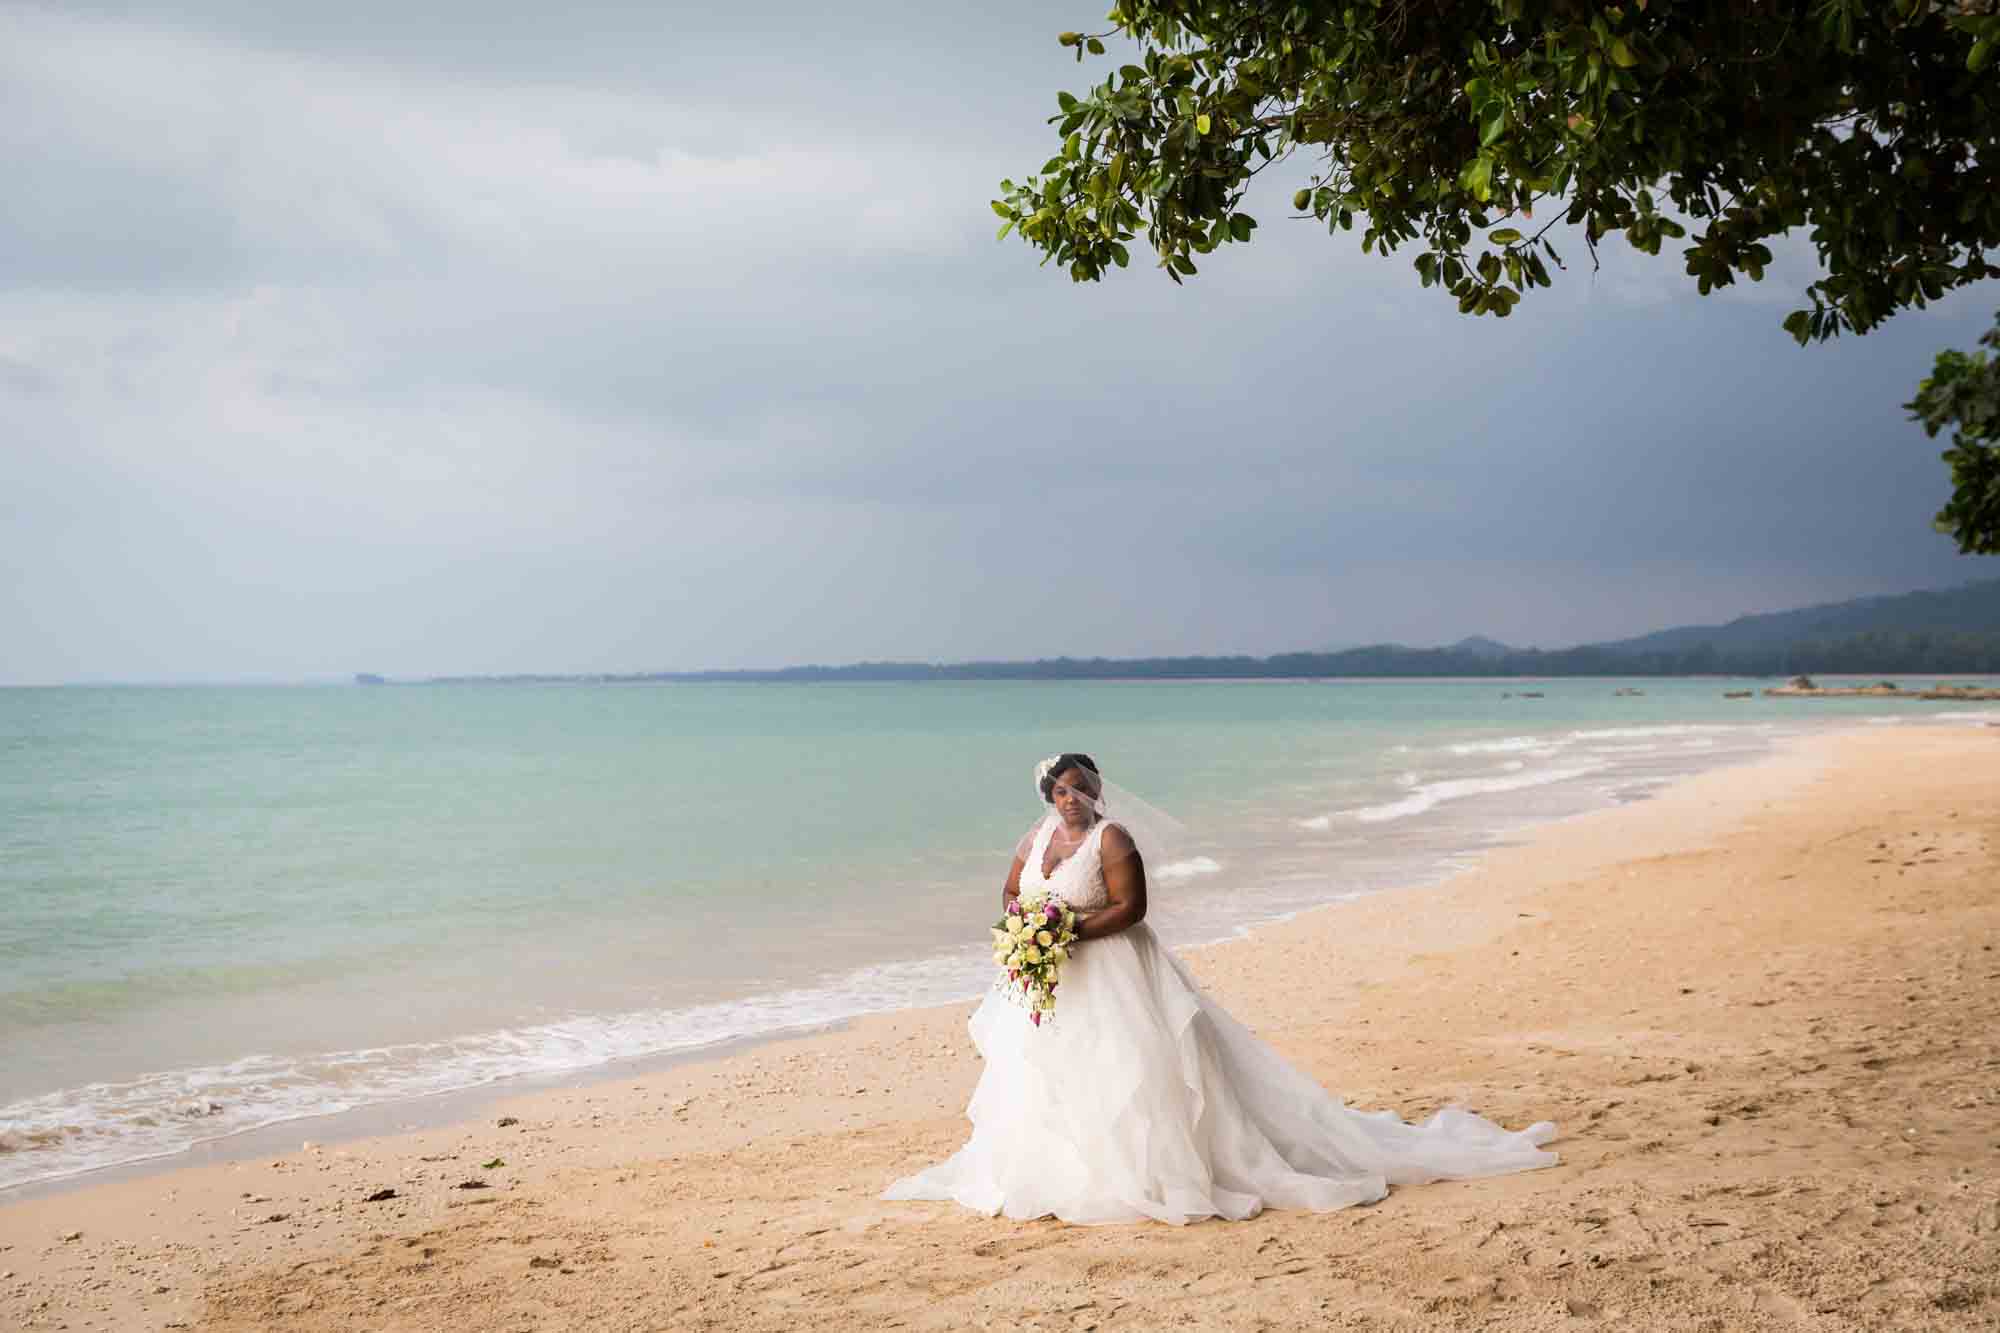 Bride on beach for an article on destination wedding planning tips